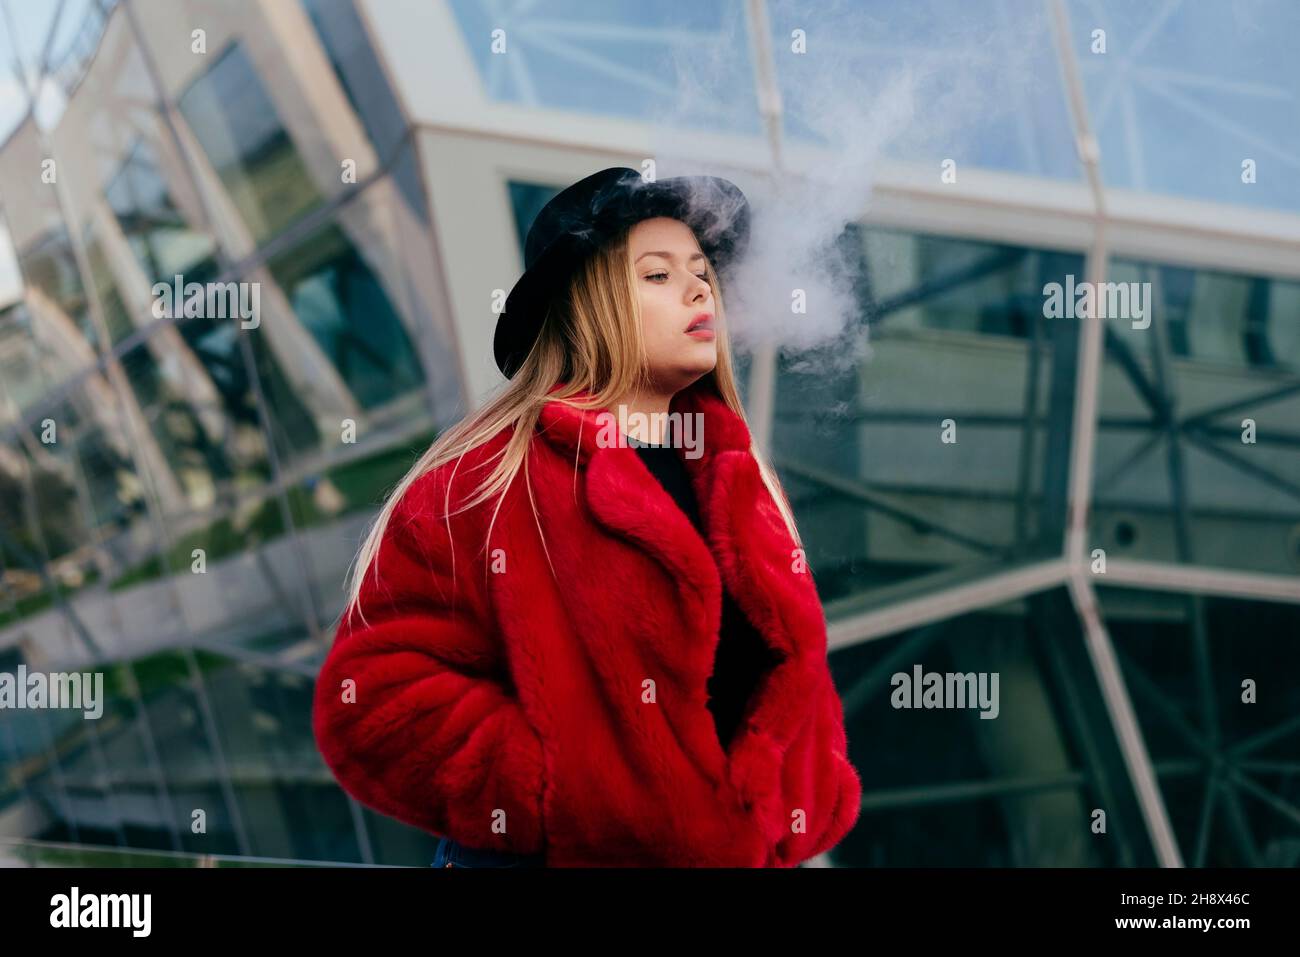 Cute blonde young Woman with hat and red jacket smoking with vaper machine on the street Stock Photo